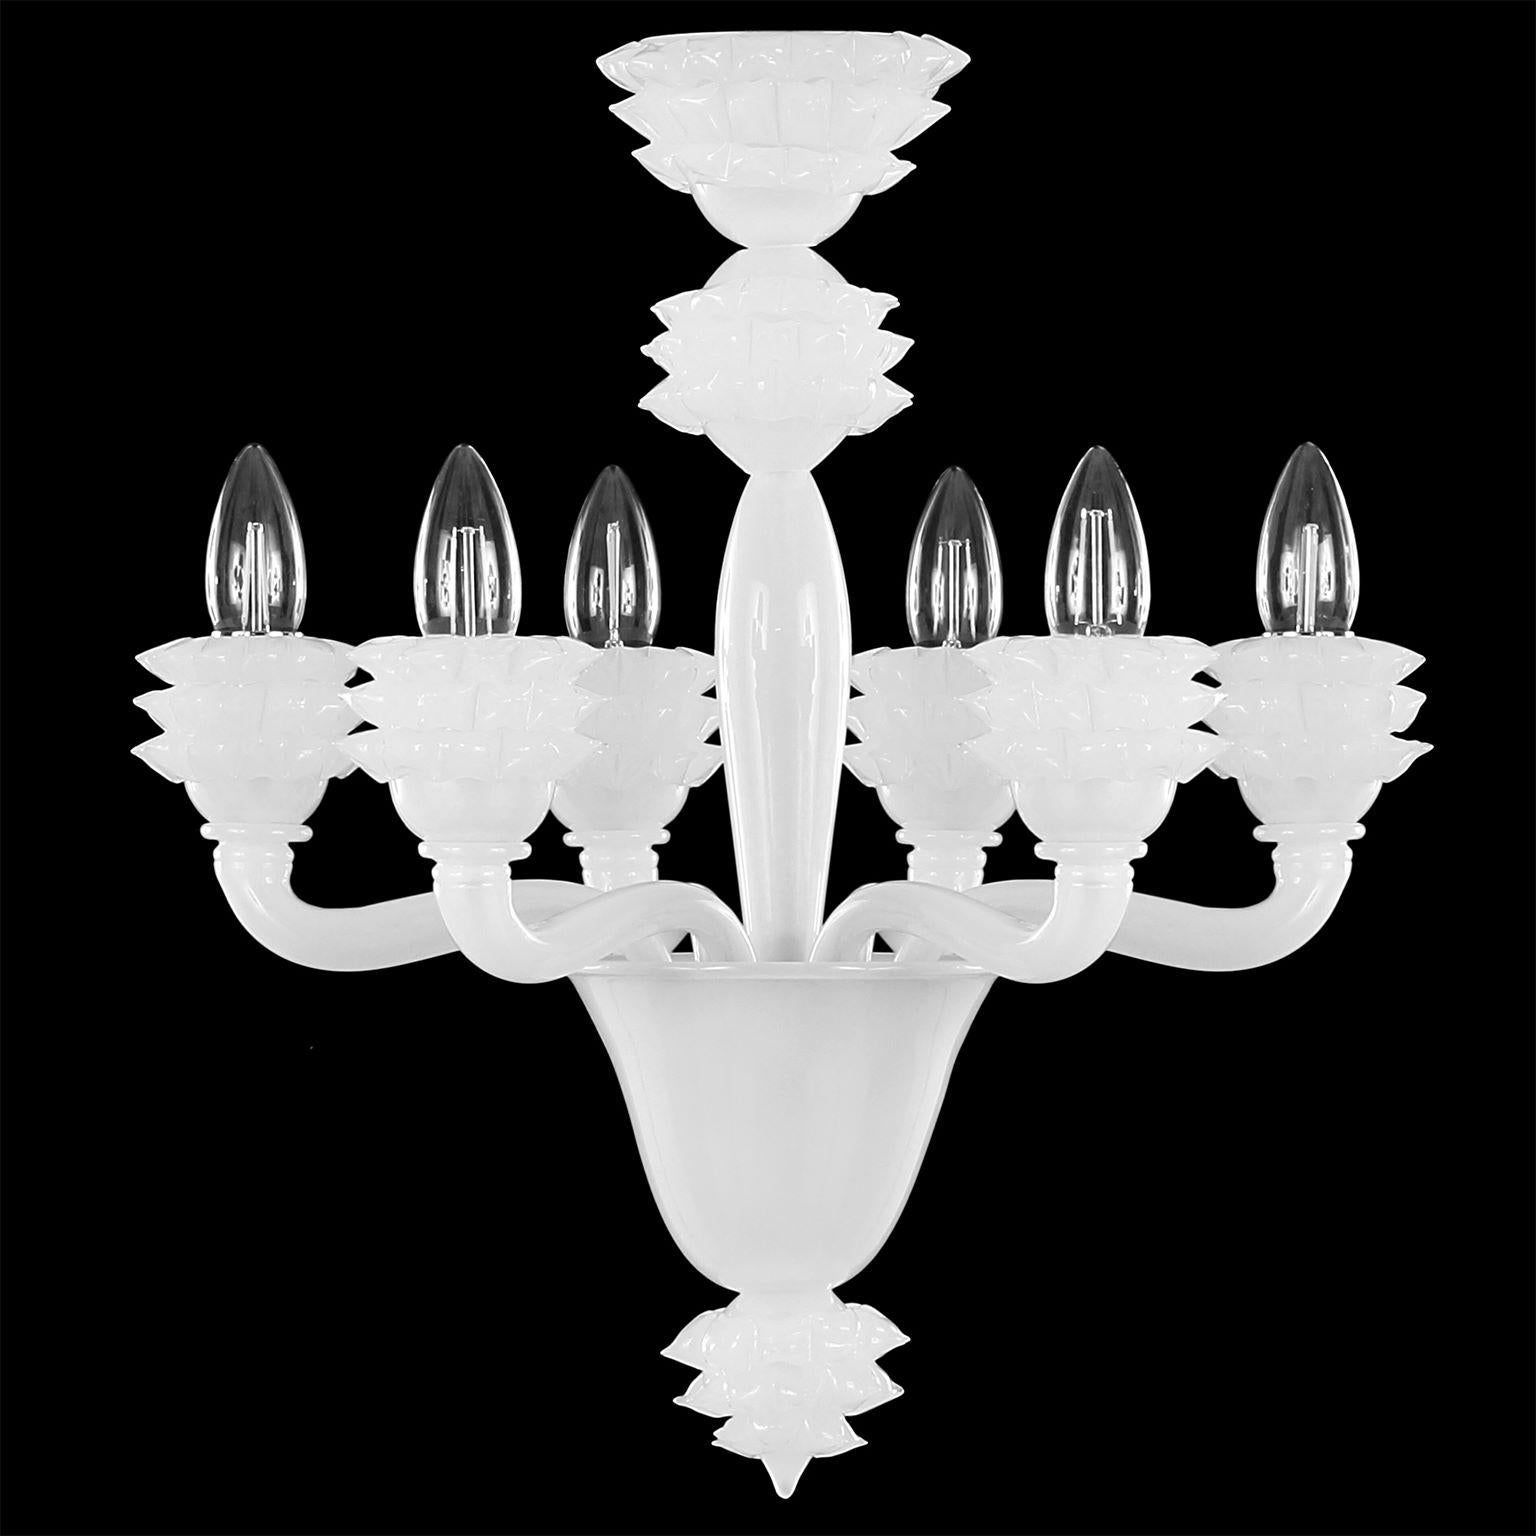 The diamante blown glass chandeliers are characterized by a slender central element.
The arms, central column and final cup are made of flawless smooth glass. The standout elements of this chandelier are the cups, which are created using a complex